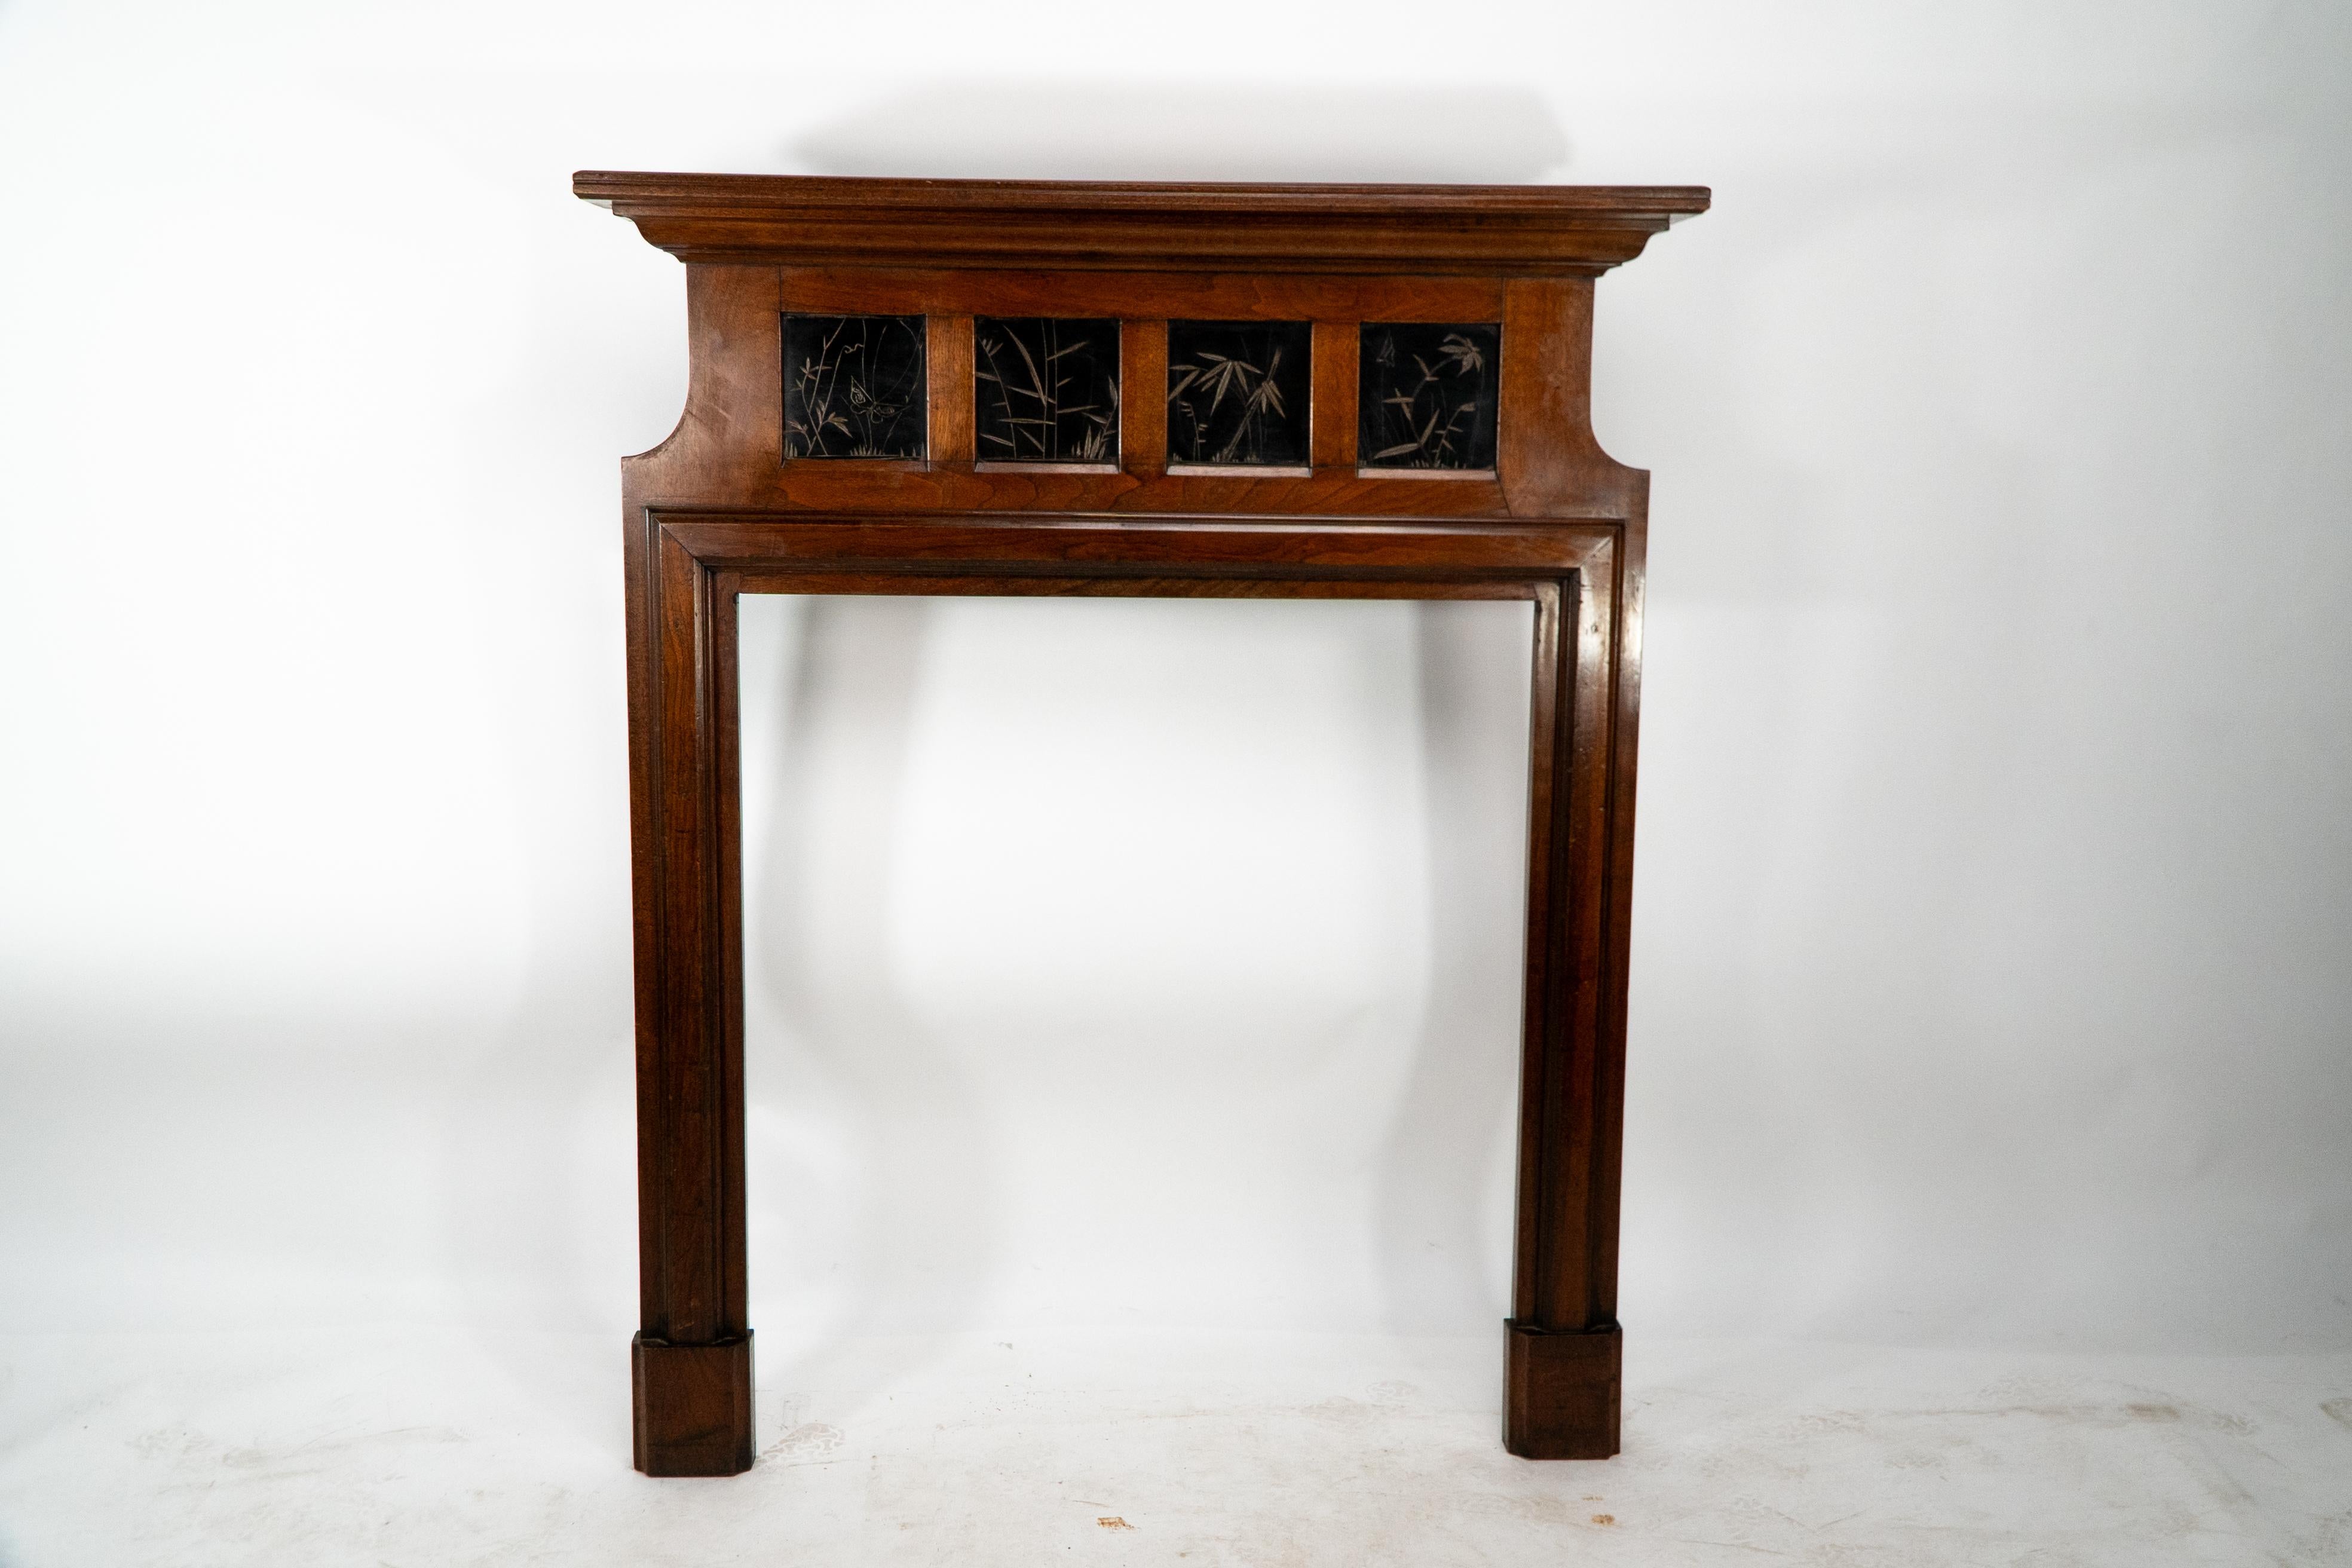 Thomas Jeckyll for Barnard Bishop and Barnard. A rare Aesthetic Movement Walnut fire surround, the mantel with molded edges and four ebonized panels incised with butterfly and bamboo stems and leaf decoration in the Japanese style with further